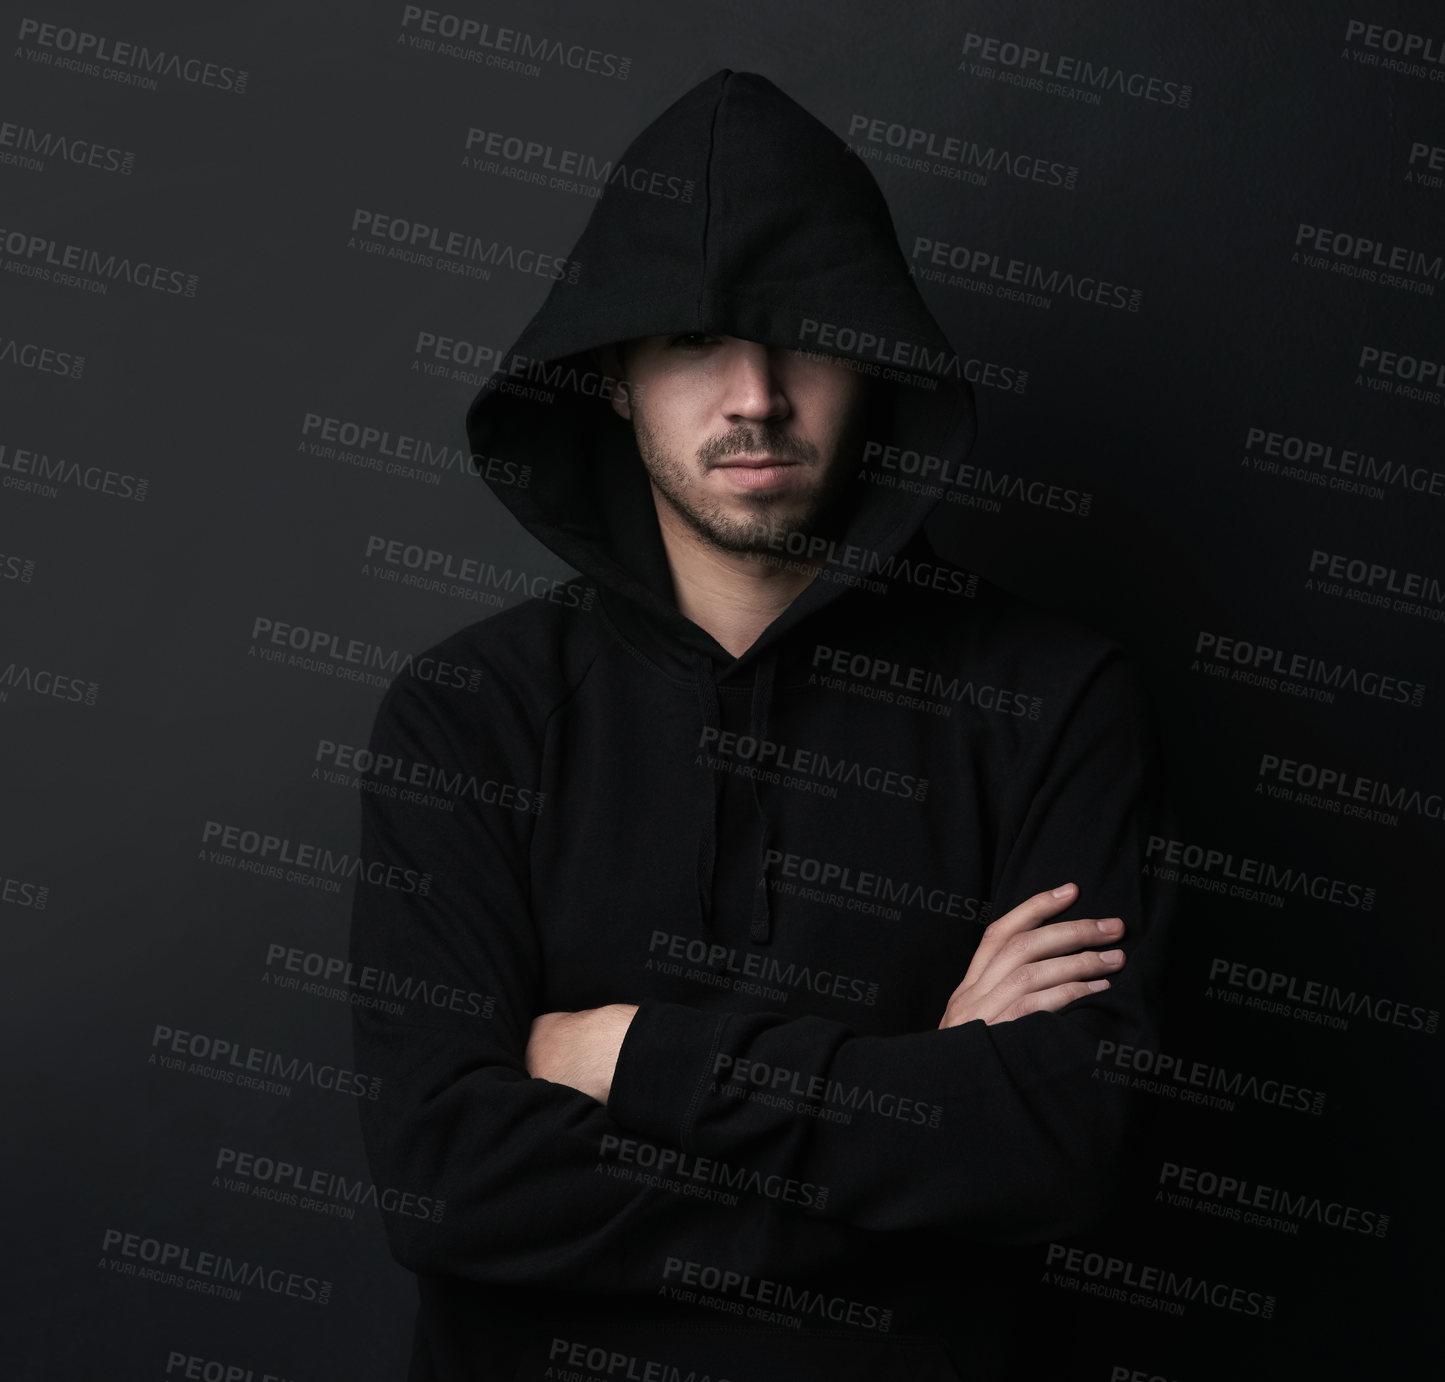 Buy stock photo Portrait of a man posing with his arms crossed against a dark background